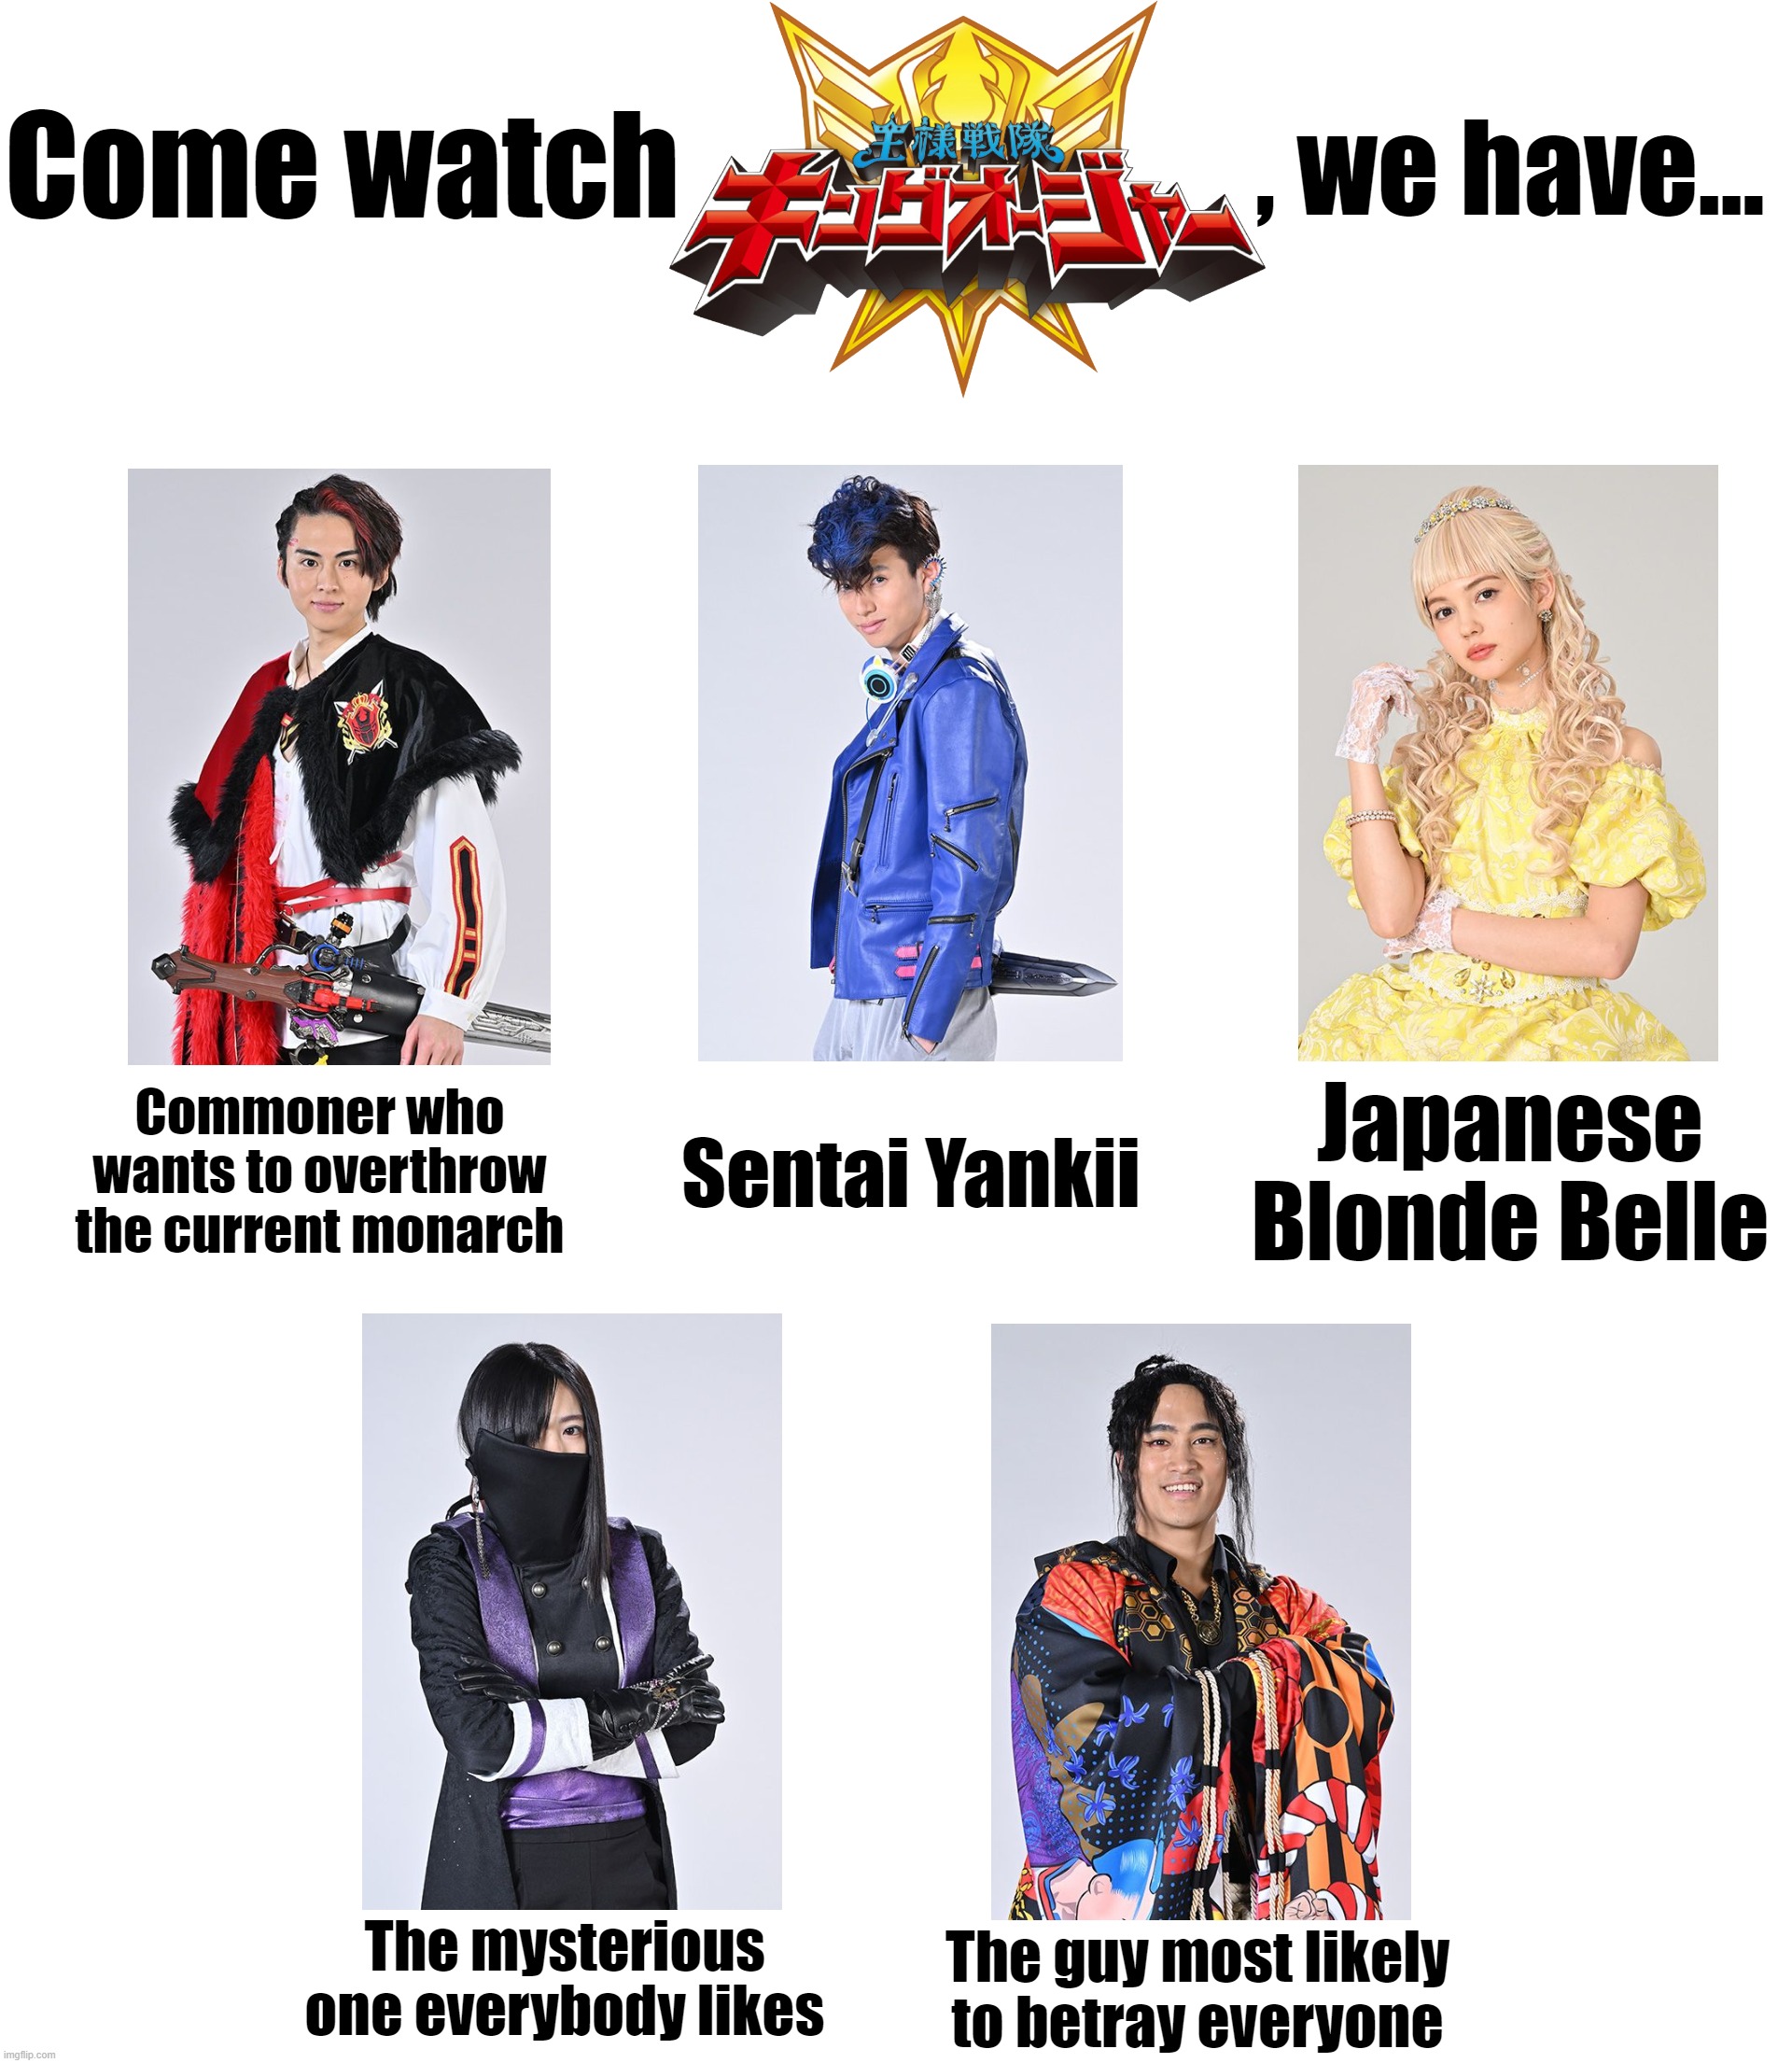  Come watch; , we have... Commoner who wants to overthrow the current monarch; Sentai Yankii; Japanese Blonde Belle; The mysterious one everybody likes; The guy most likely to betray everyone | image tagged in in a nutshell | made w/ Imgflip meme maker